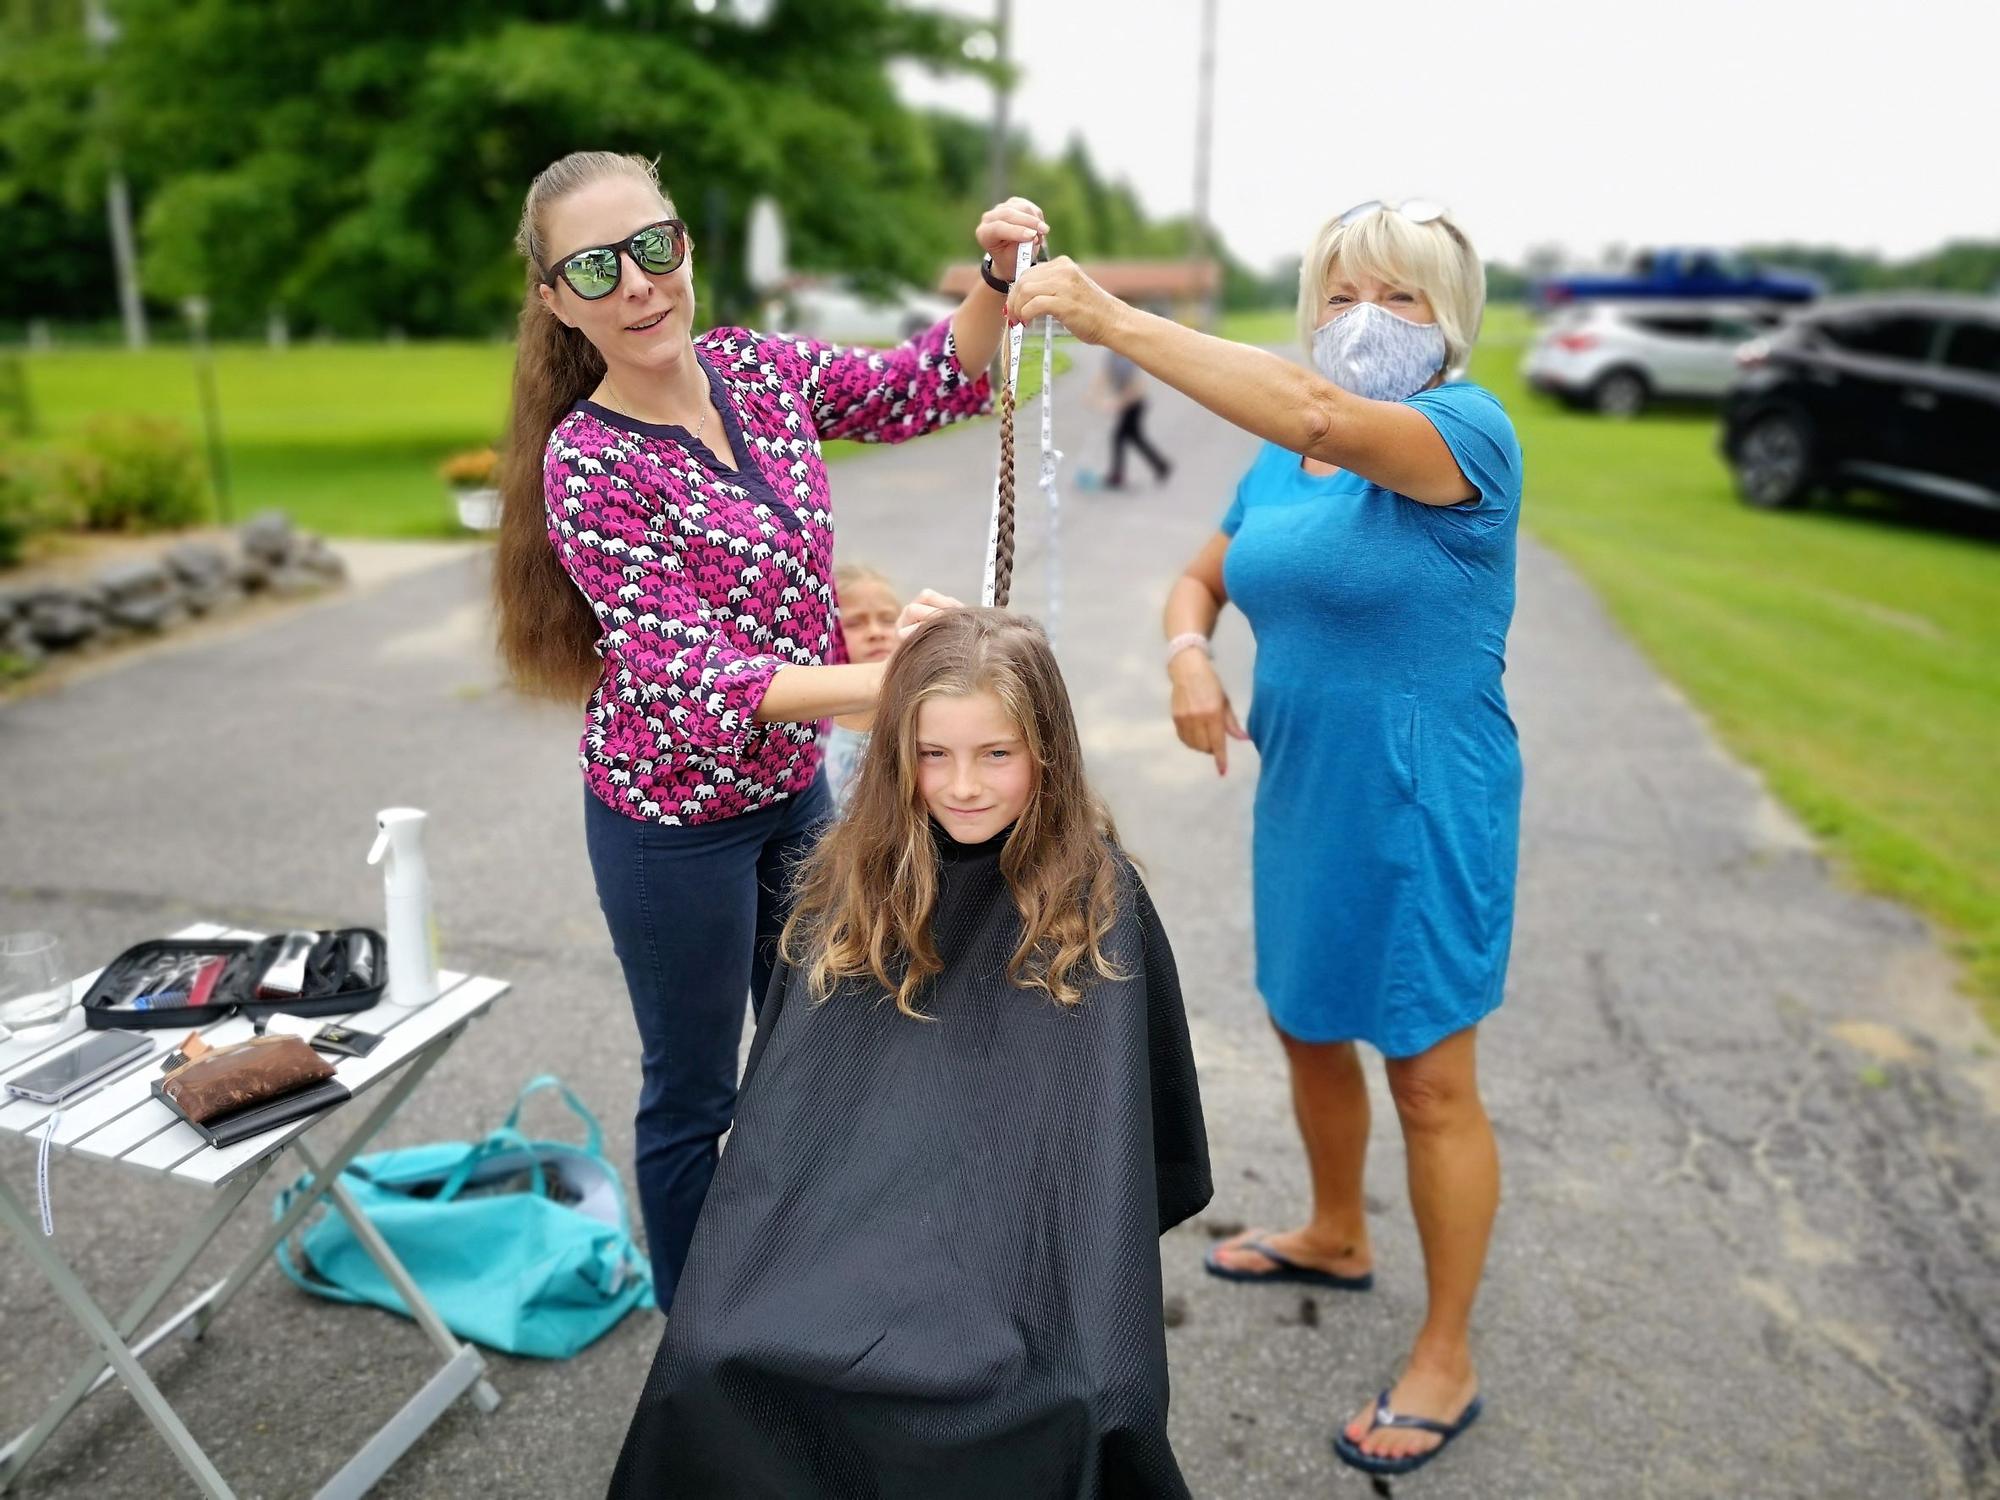 Champlain youth’s long locks trimmed to make wigs for cancer patients